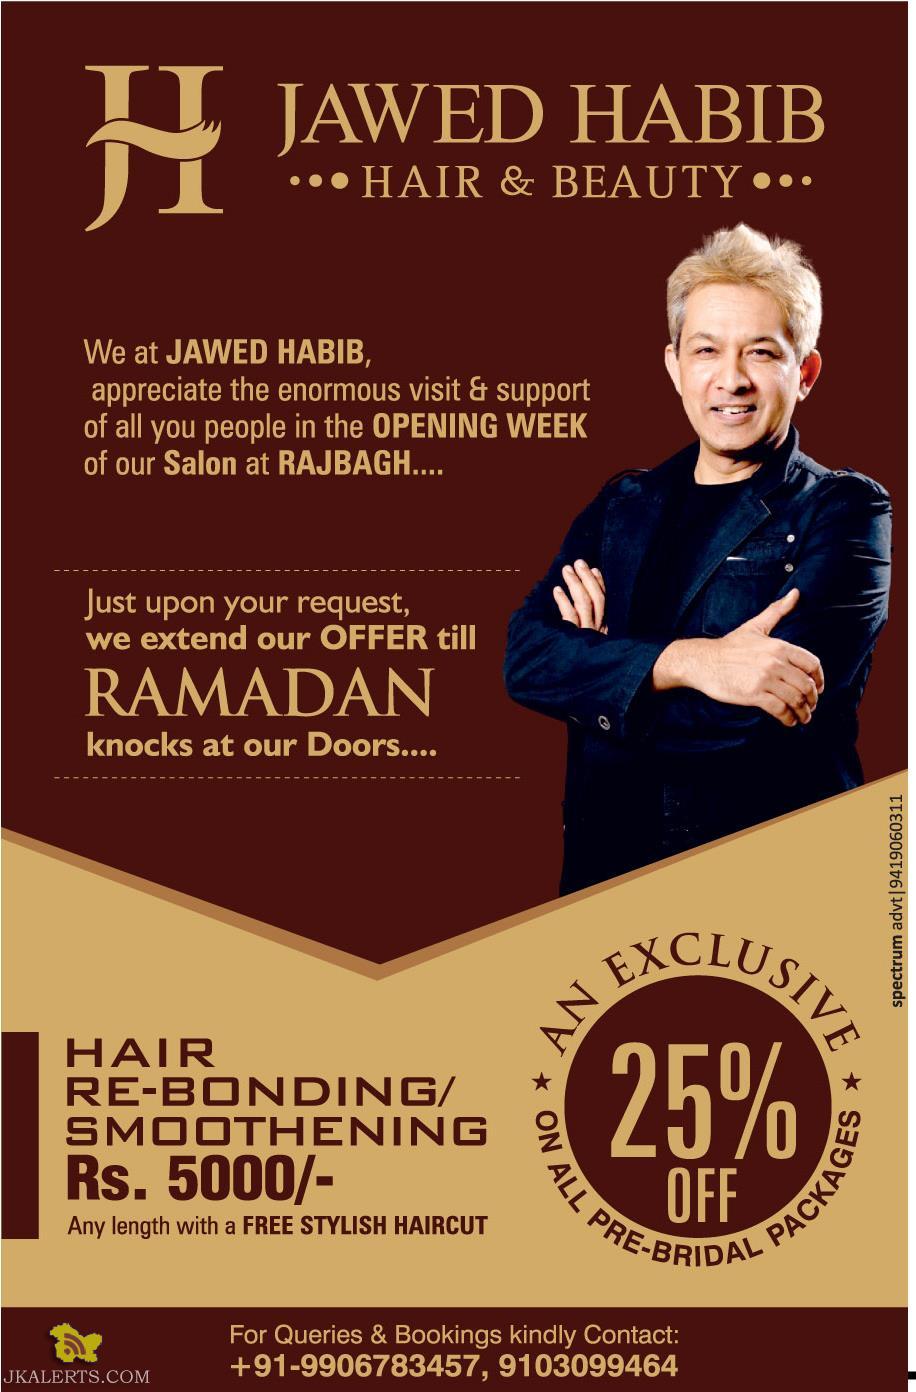 JAWED HABIB HAIR & BEAUTY offer 25% off